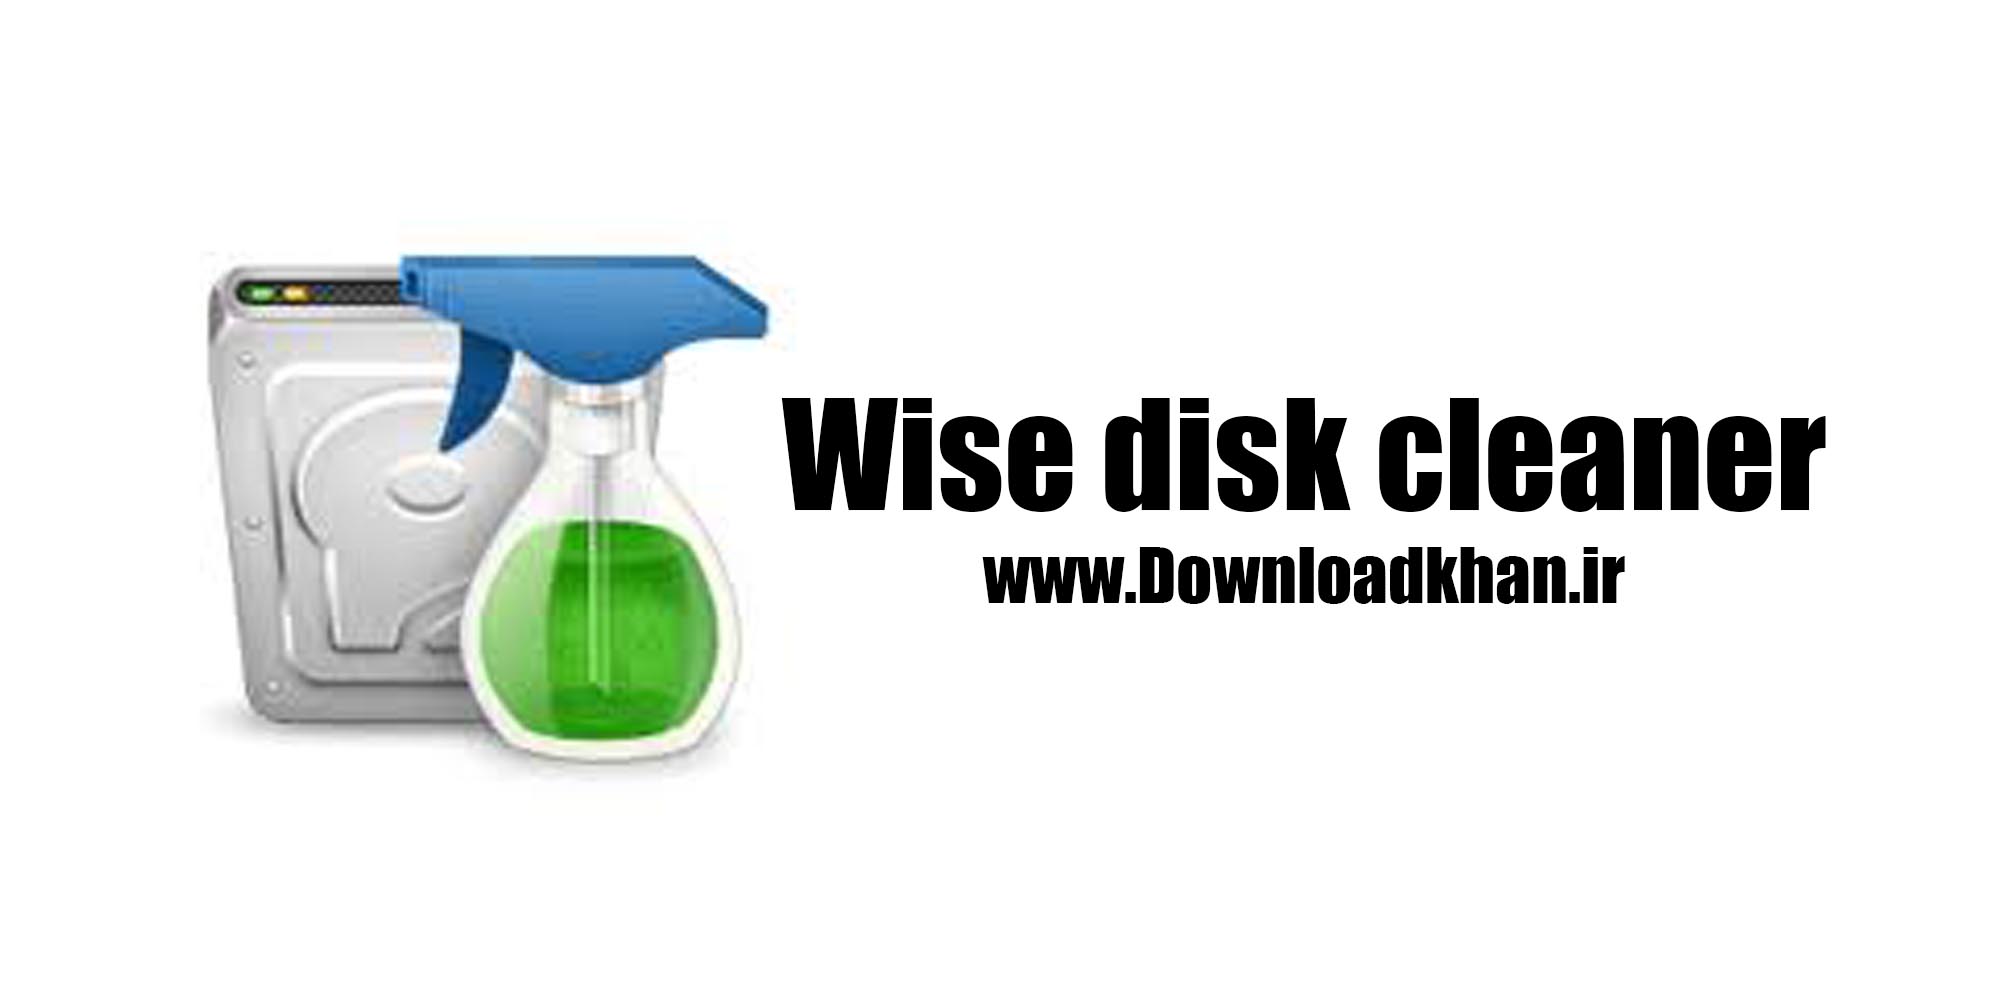 Magic Disk Cleaner instal the new for apple